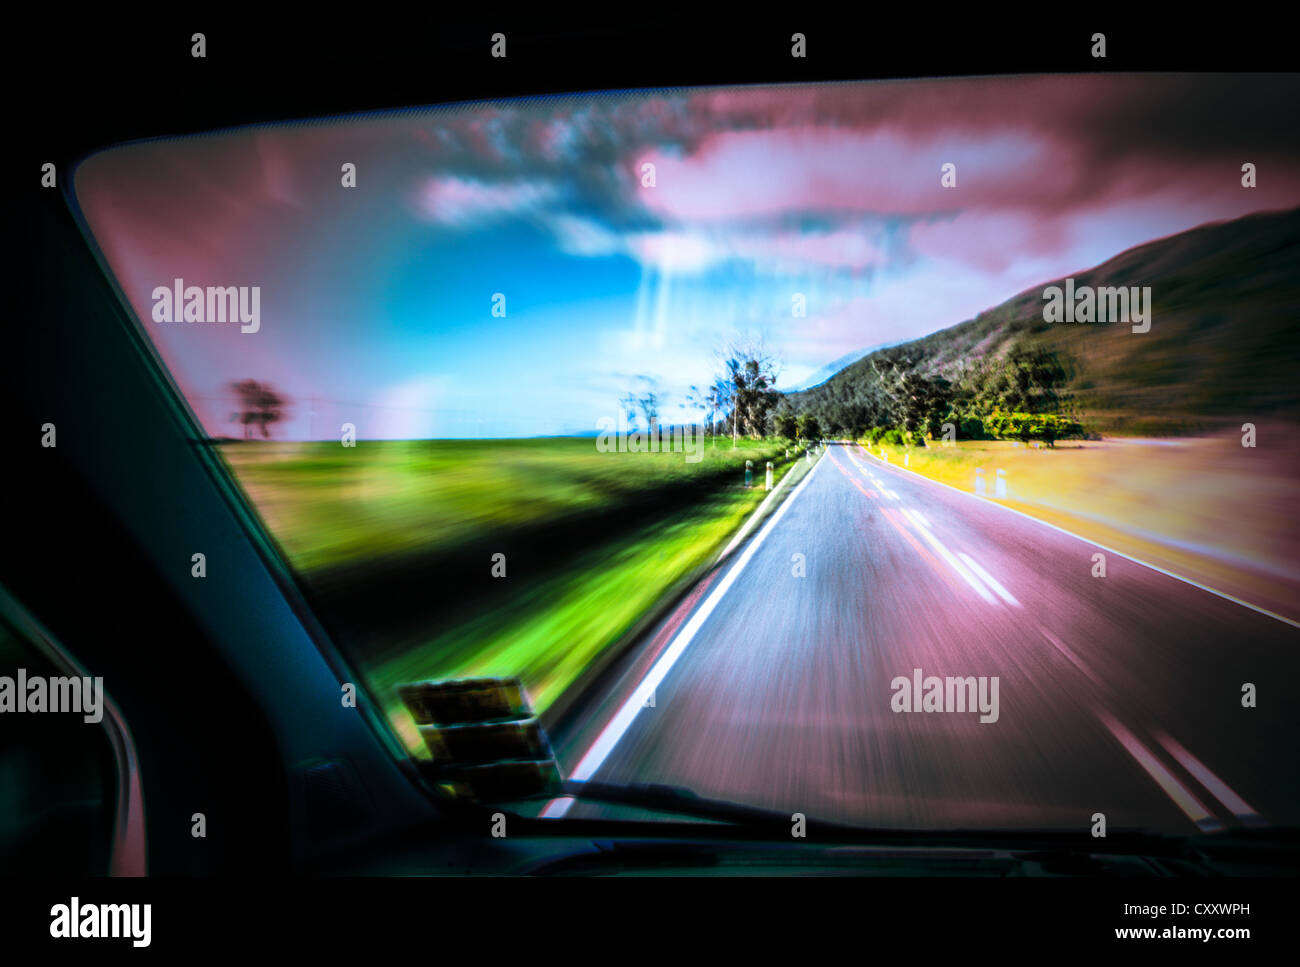 Driving under the influence of drugs, danger to road traffic, driving on the left, view from inside a car on the road Stock Photo